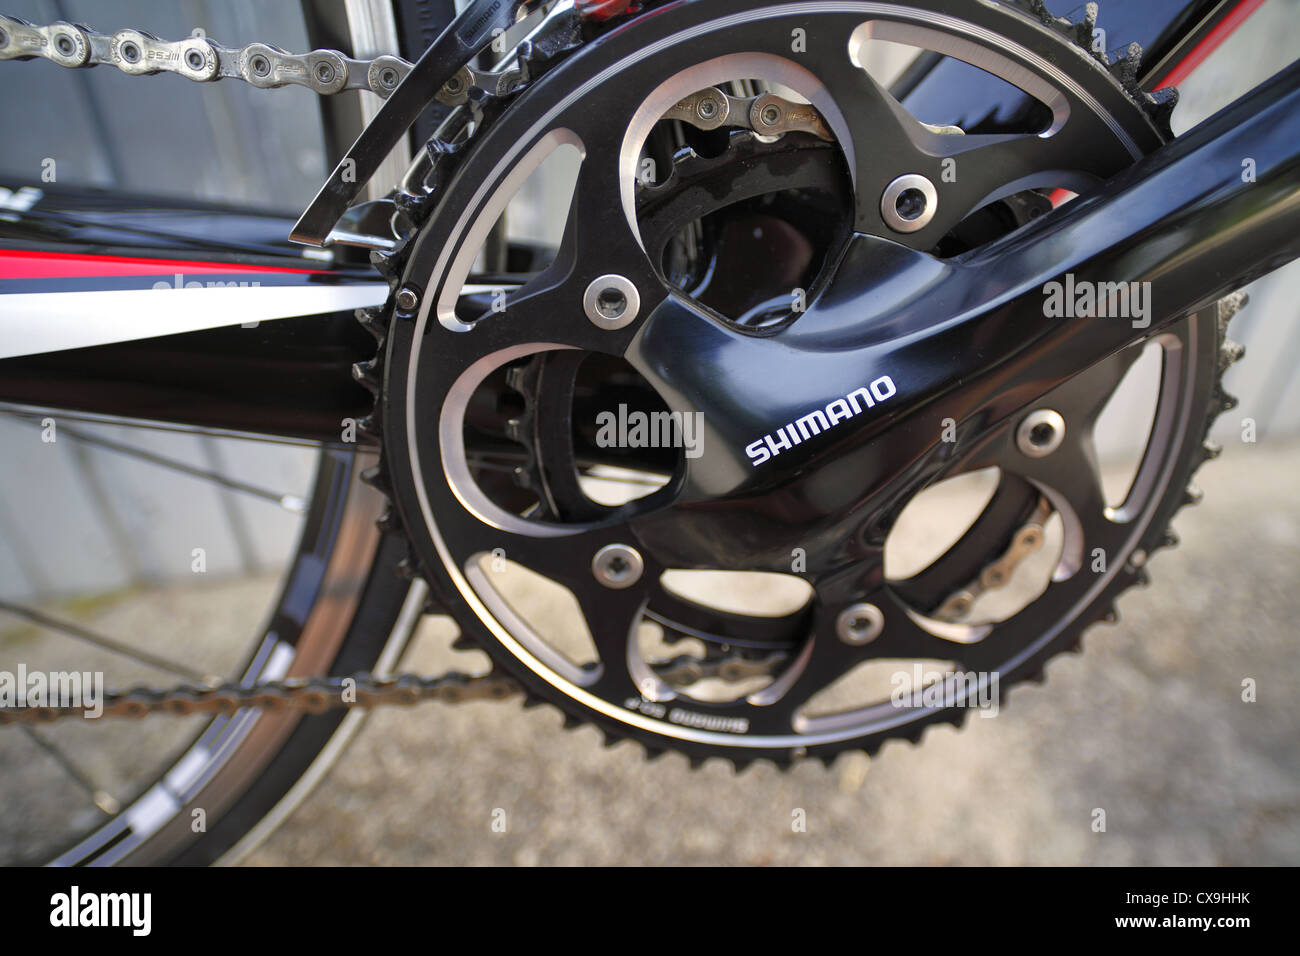 Shimano bicycle chainring detail. Stock Photo